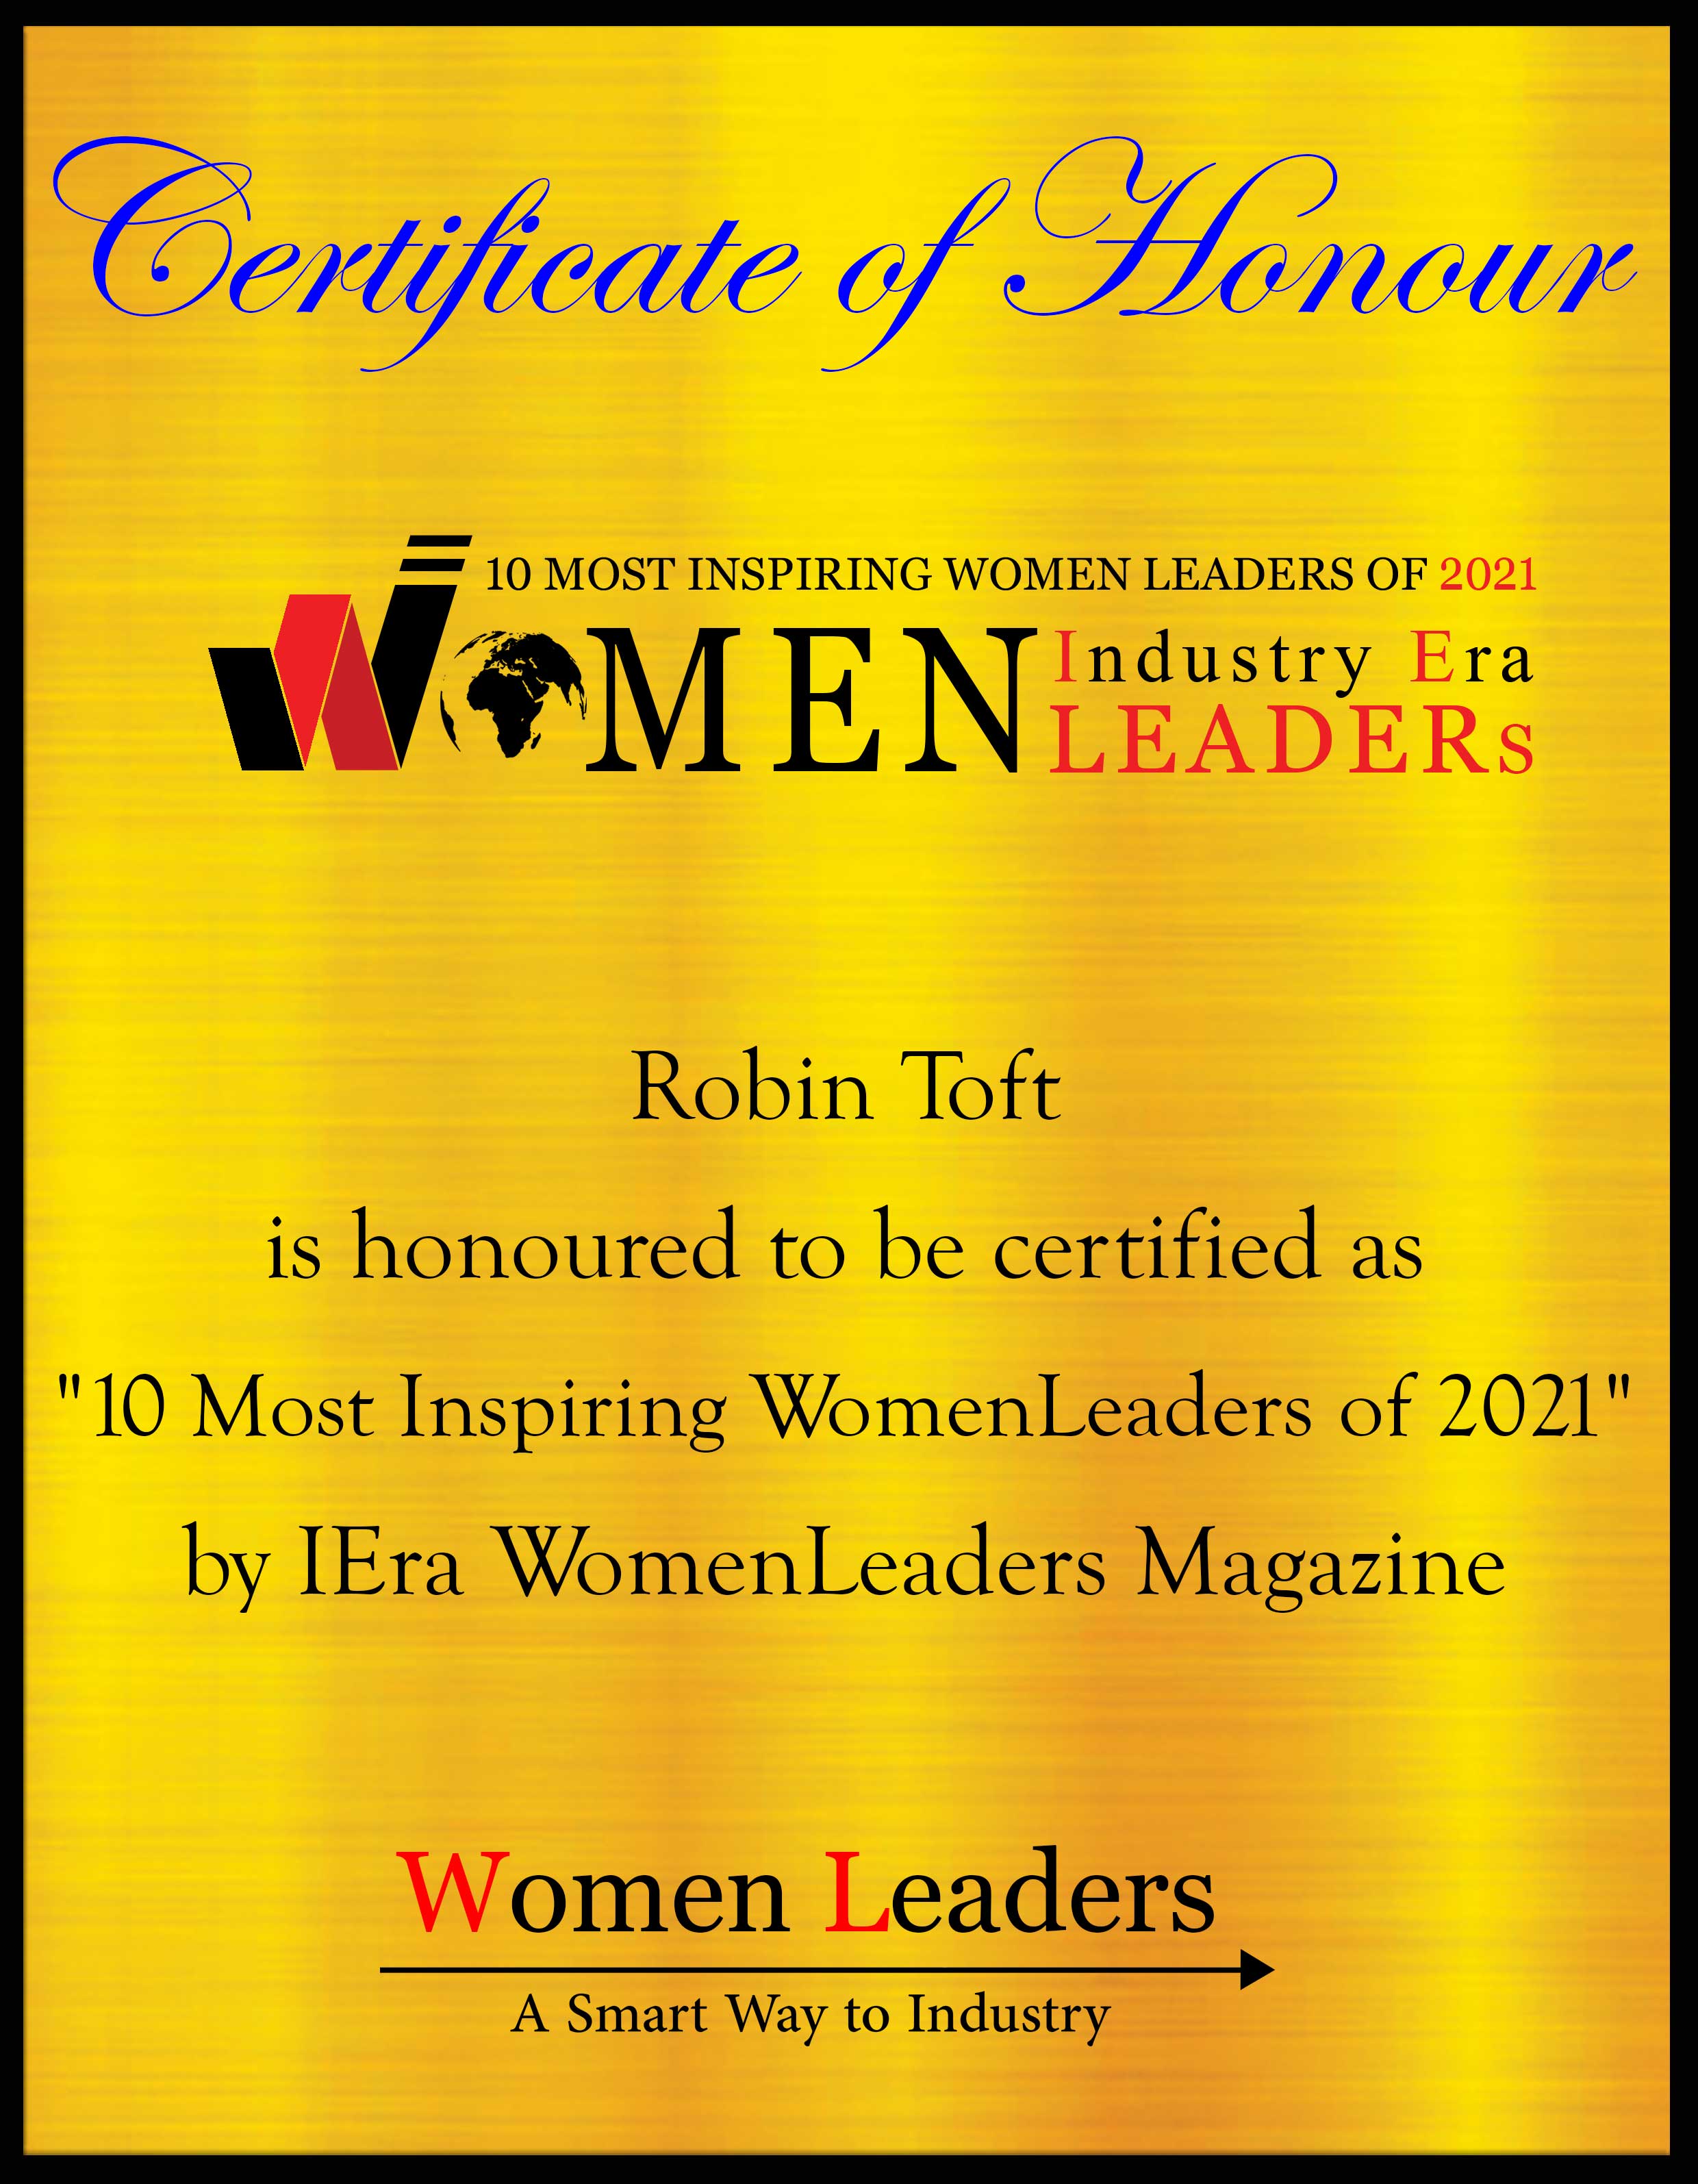 Robin Toft, Chairman & Founder of Toft Group Executive Search Most Inspiring WomenLeaders of 2021